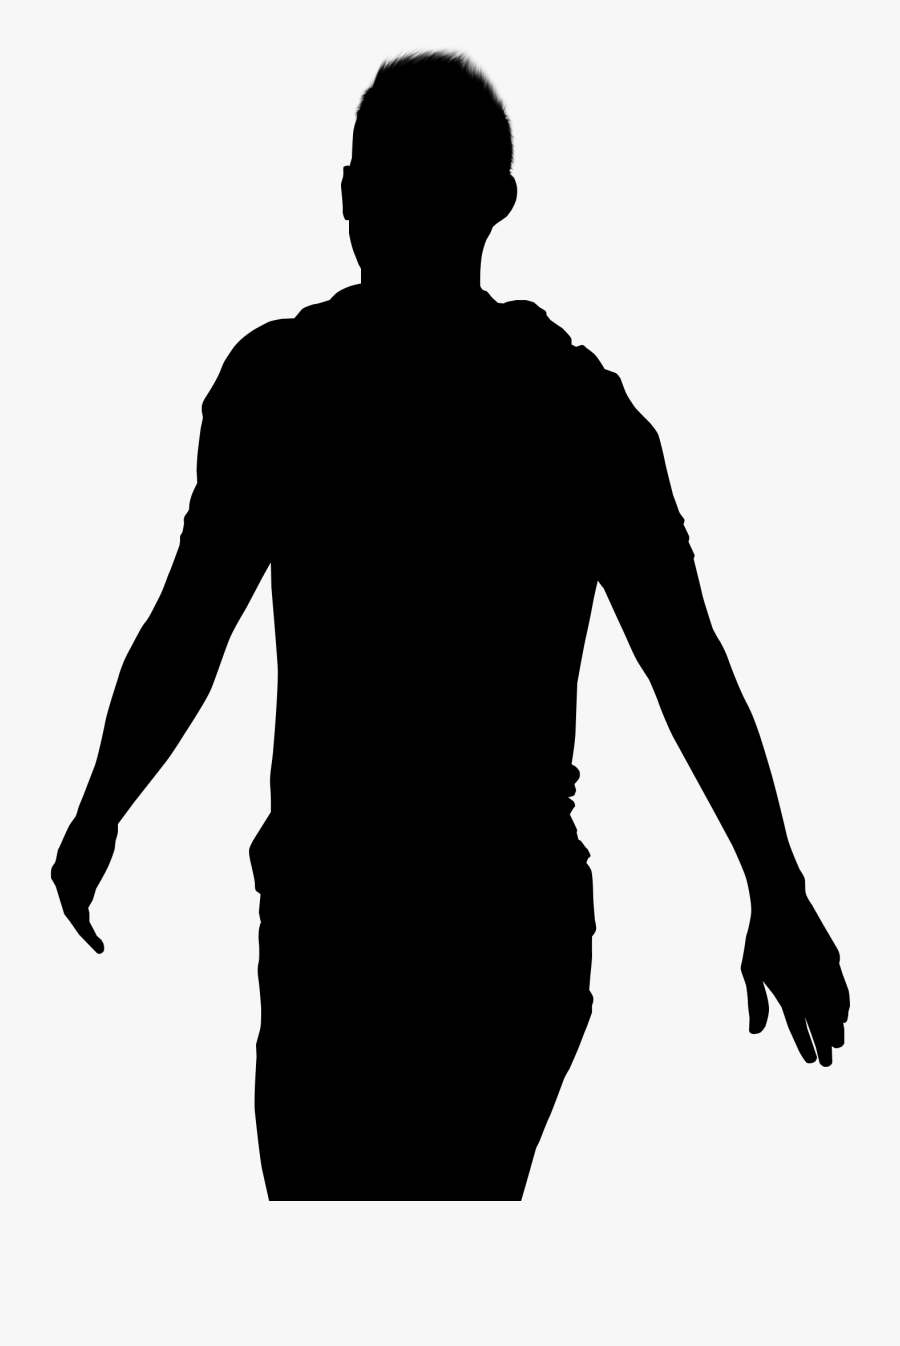 Human Silhouette 5png - Silhouette, Transparent Clipart